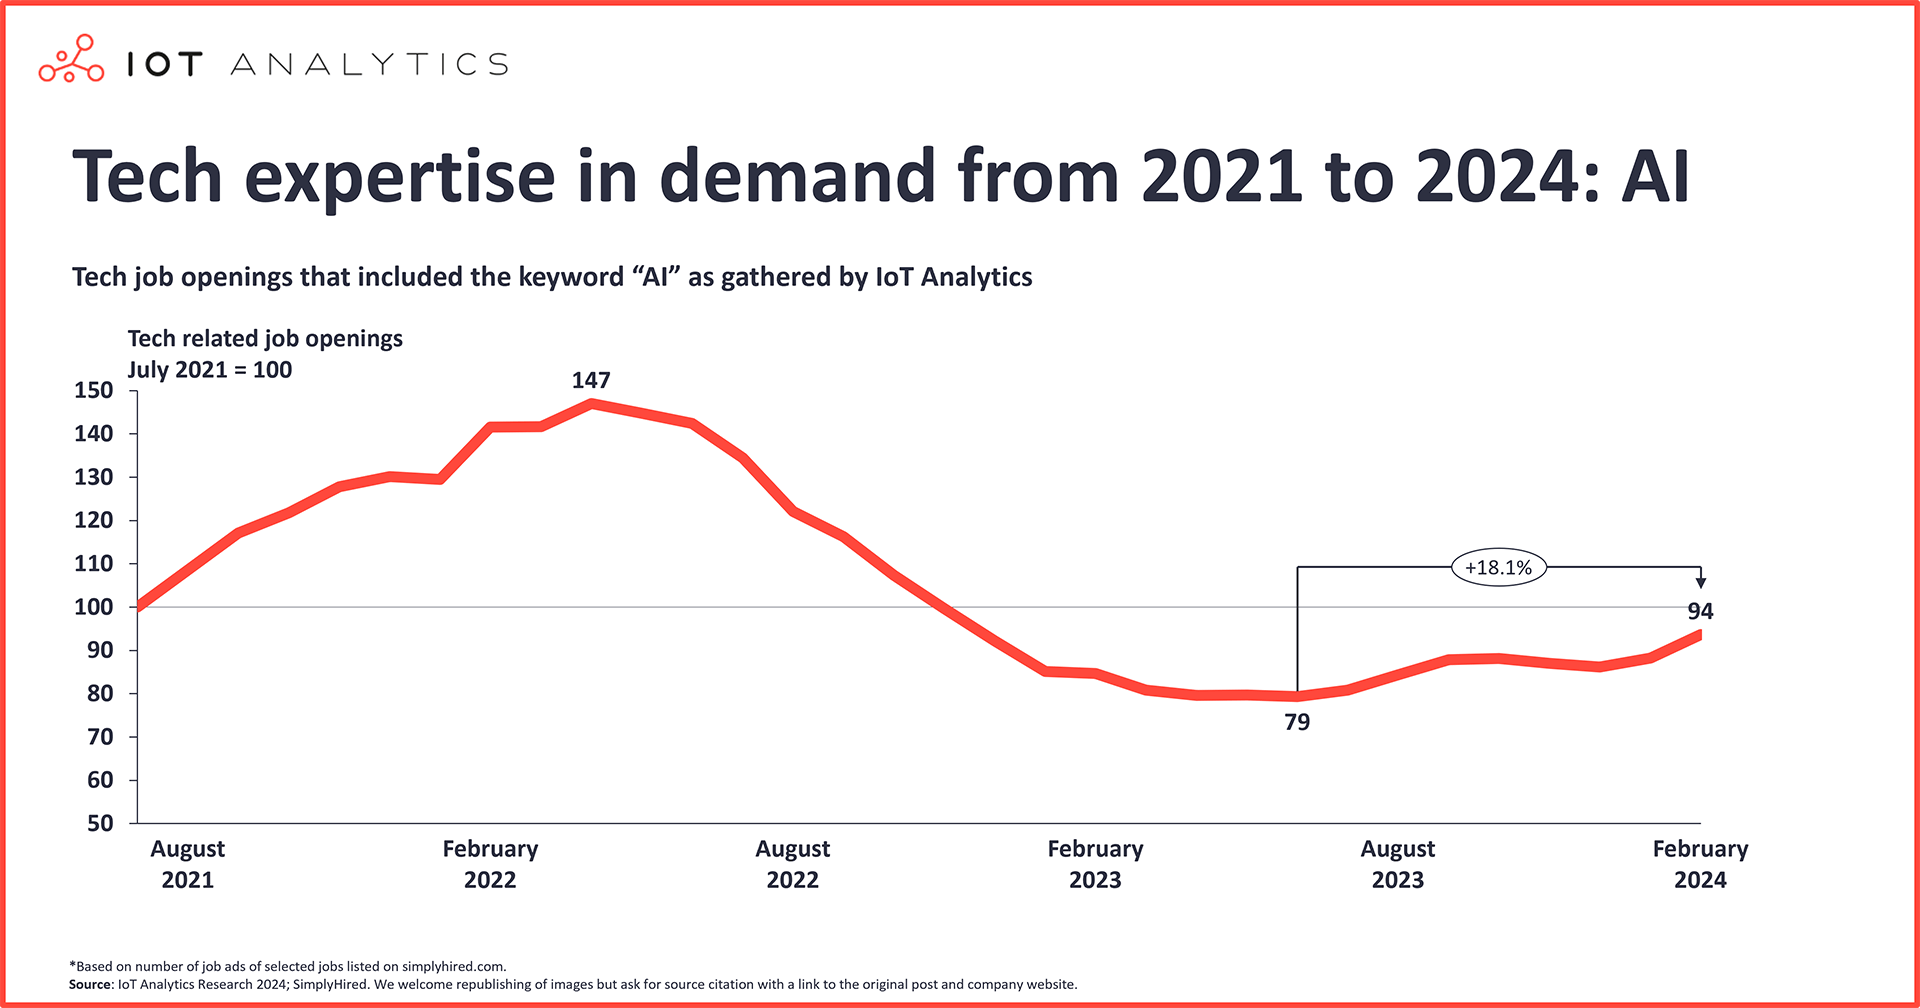 Tech expertise in demand from 2021 to 2024 - AI